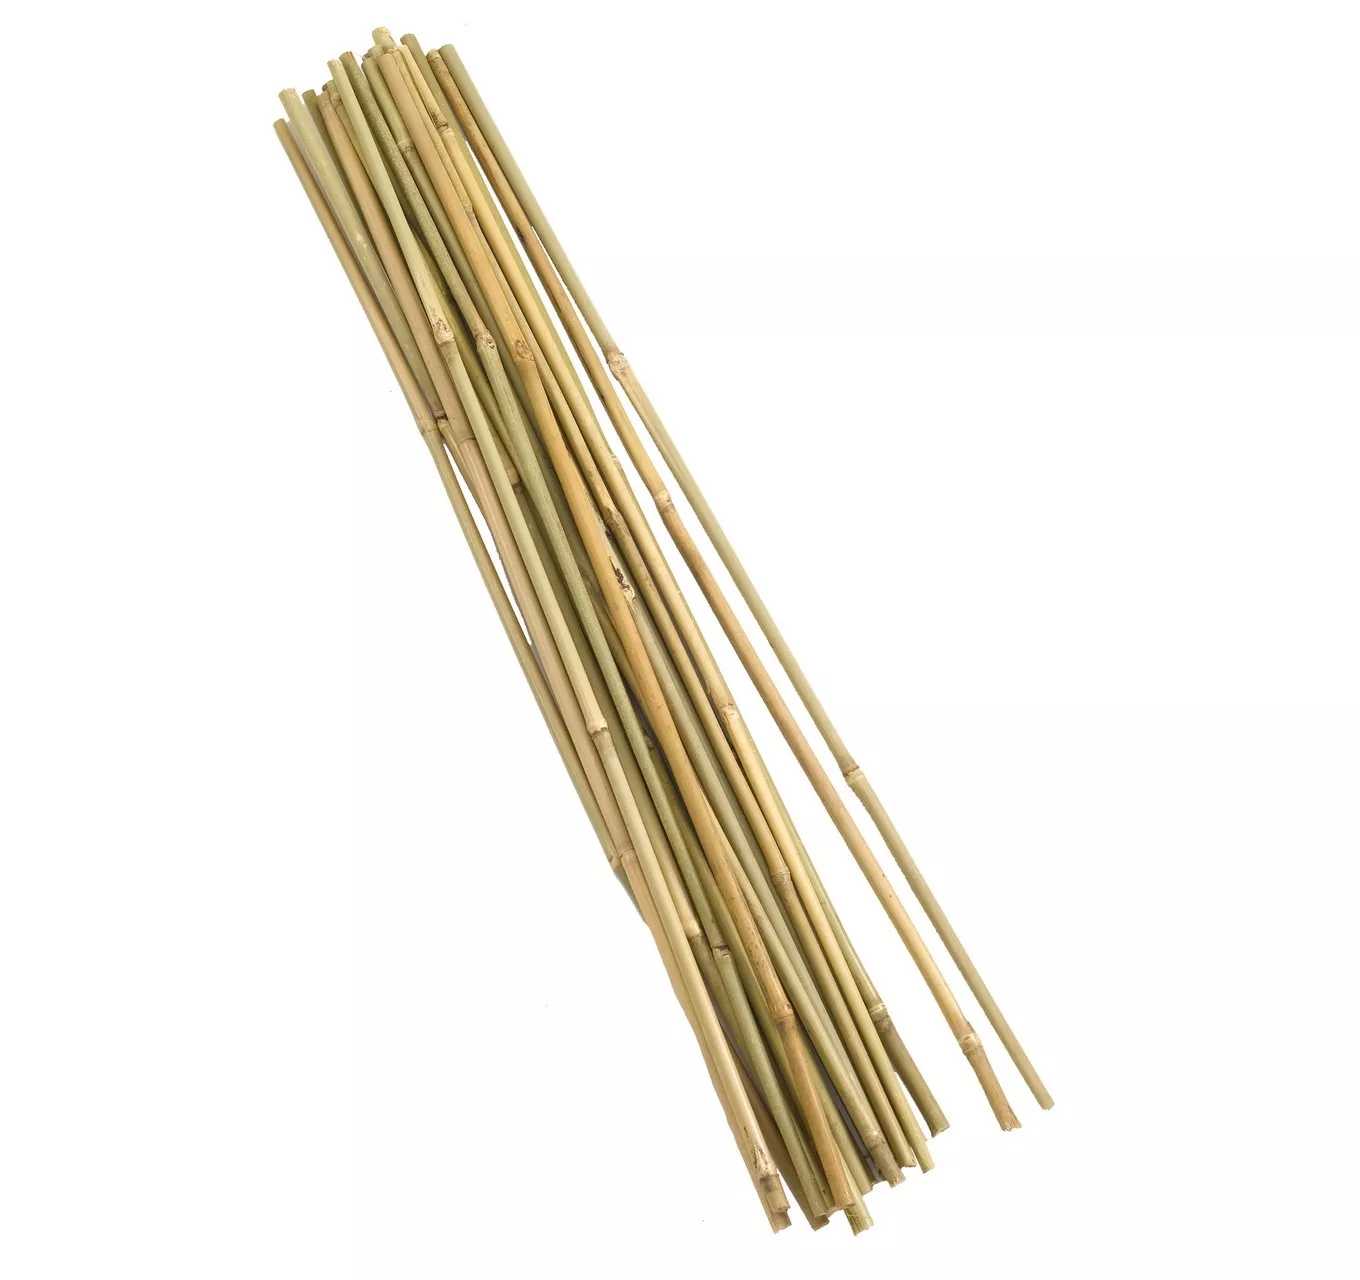 Bamboo Canes 150cm 20pk 5ft